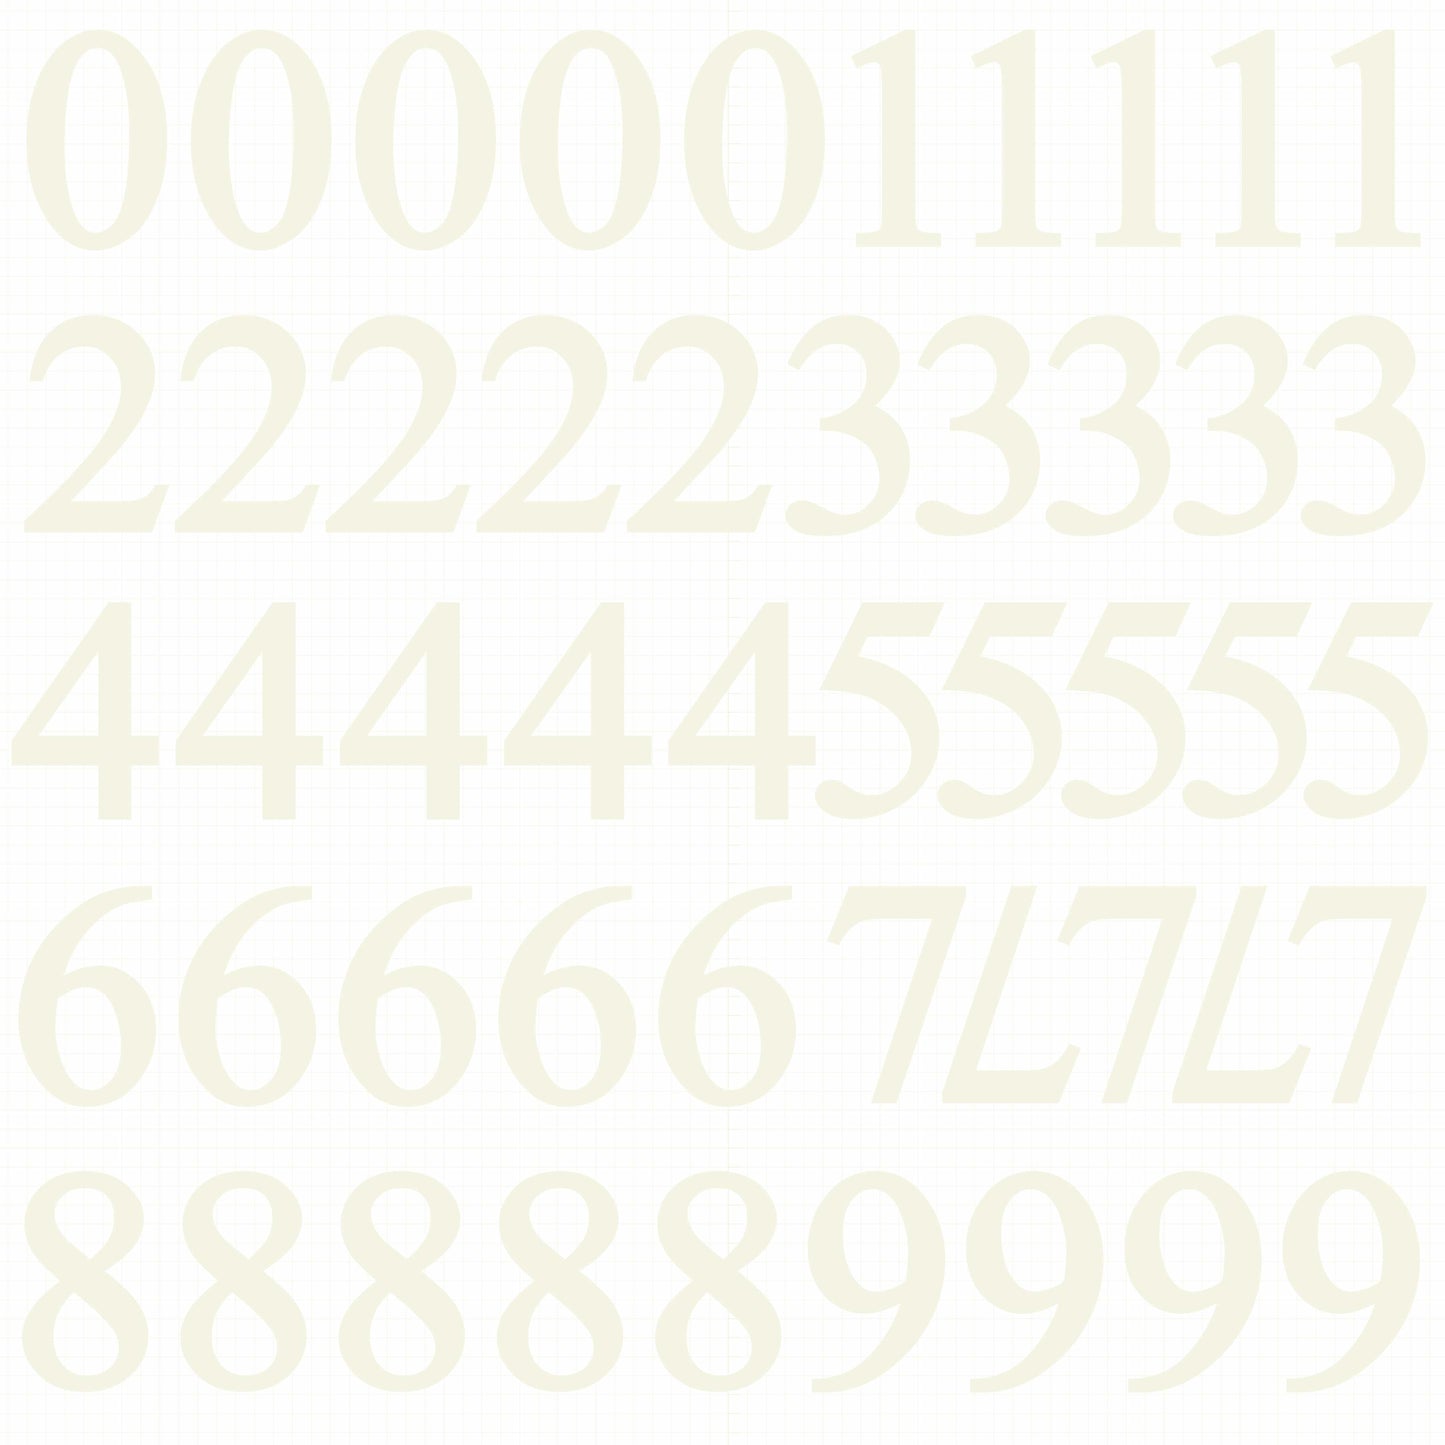 Number Stickers - Ivory